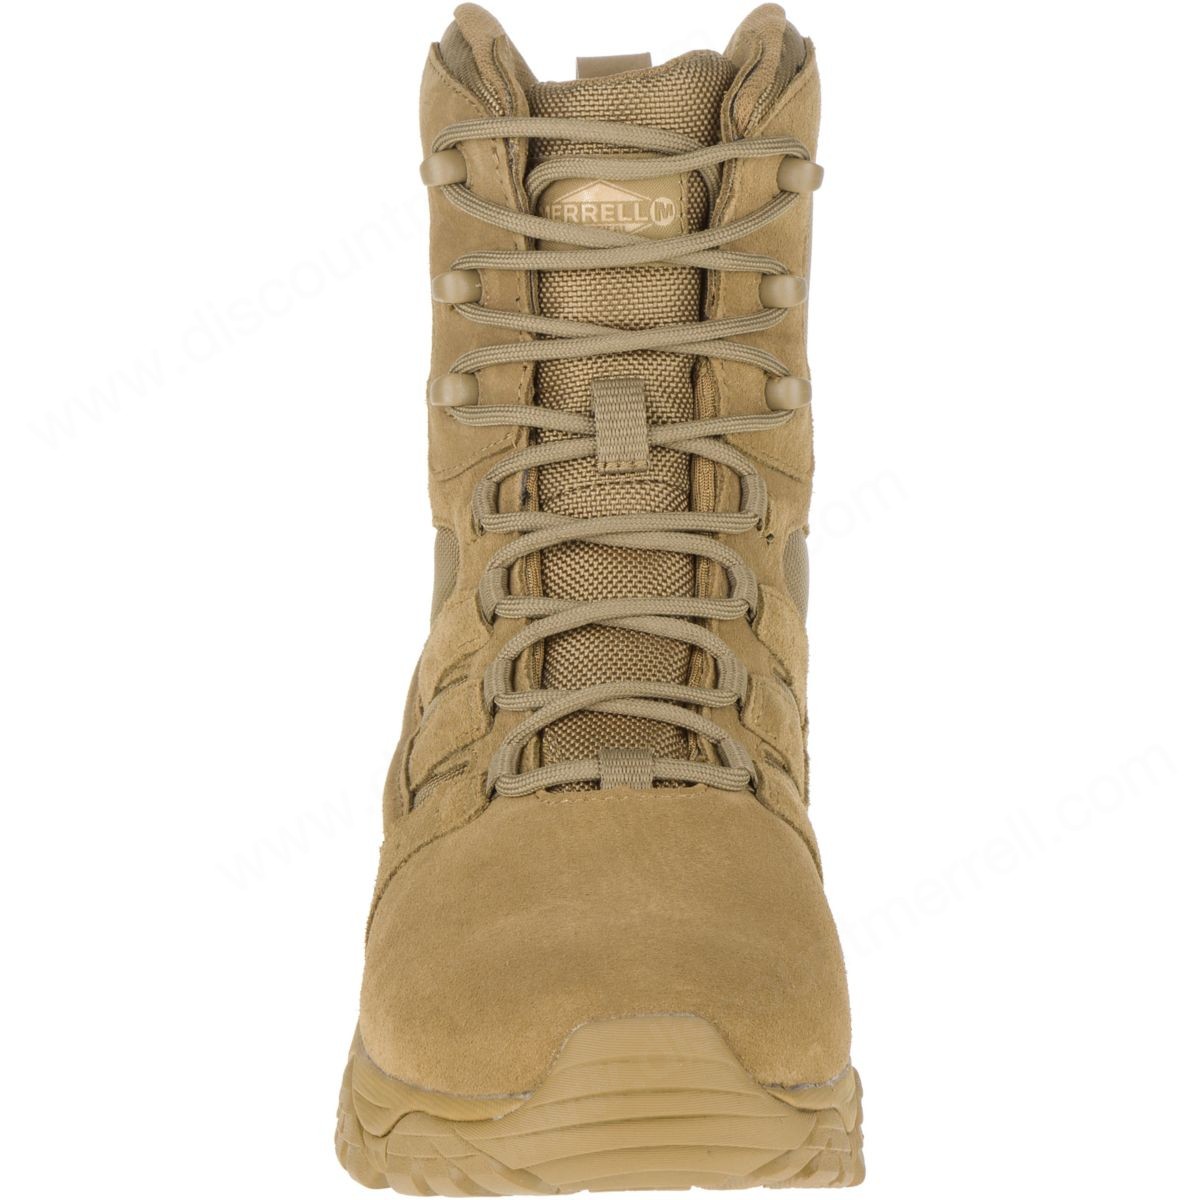 Merrell Lady's Moab " Tactical Defense Boot Coyote - -4